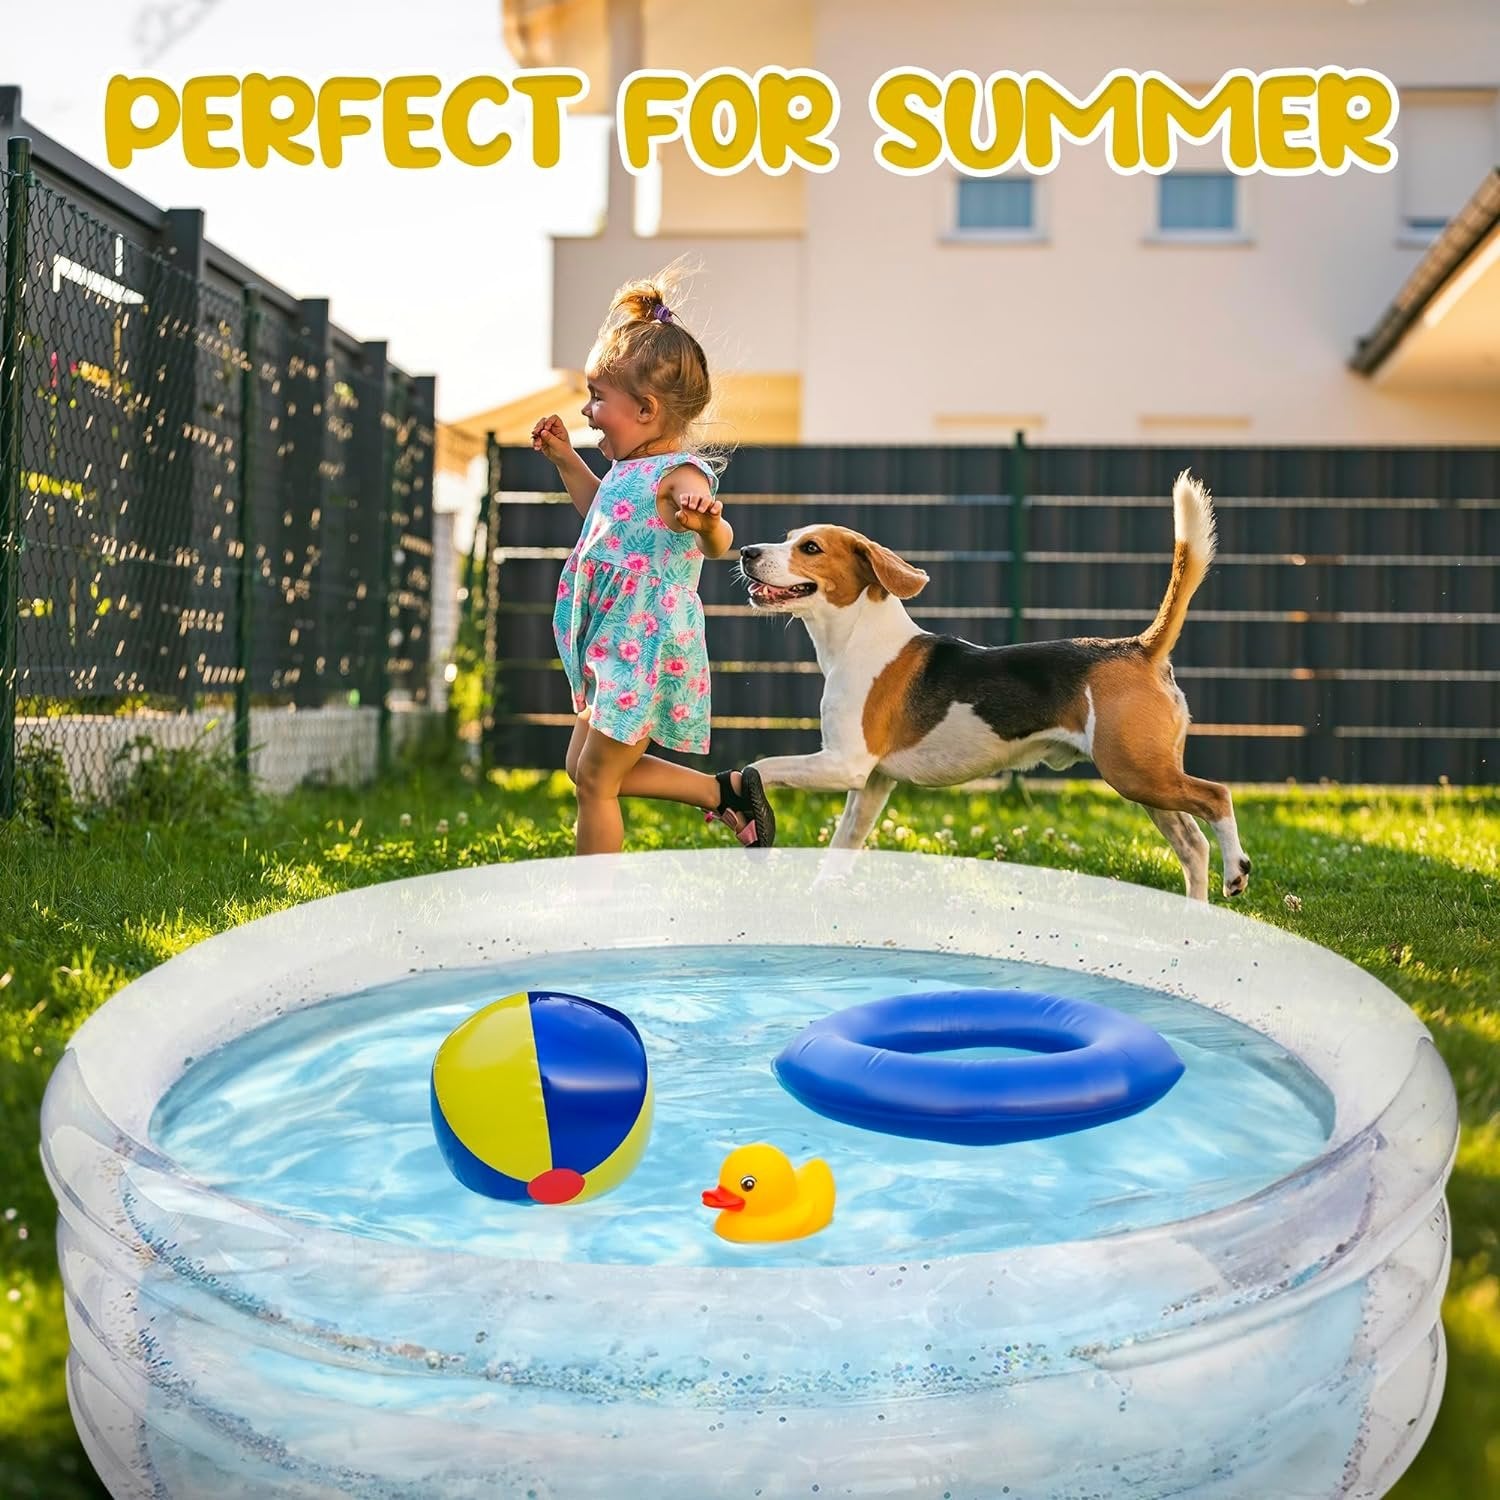 Sparkly Inflatable Kiddie Pool for Kids - 3 Levels - Transparent Blow Up Kiddie Pool with Silver Glitter and Cushioned Bottom, Easy to Inflate Small Kiddie Pools for Backyard